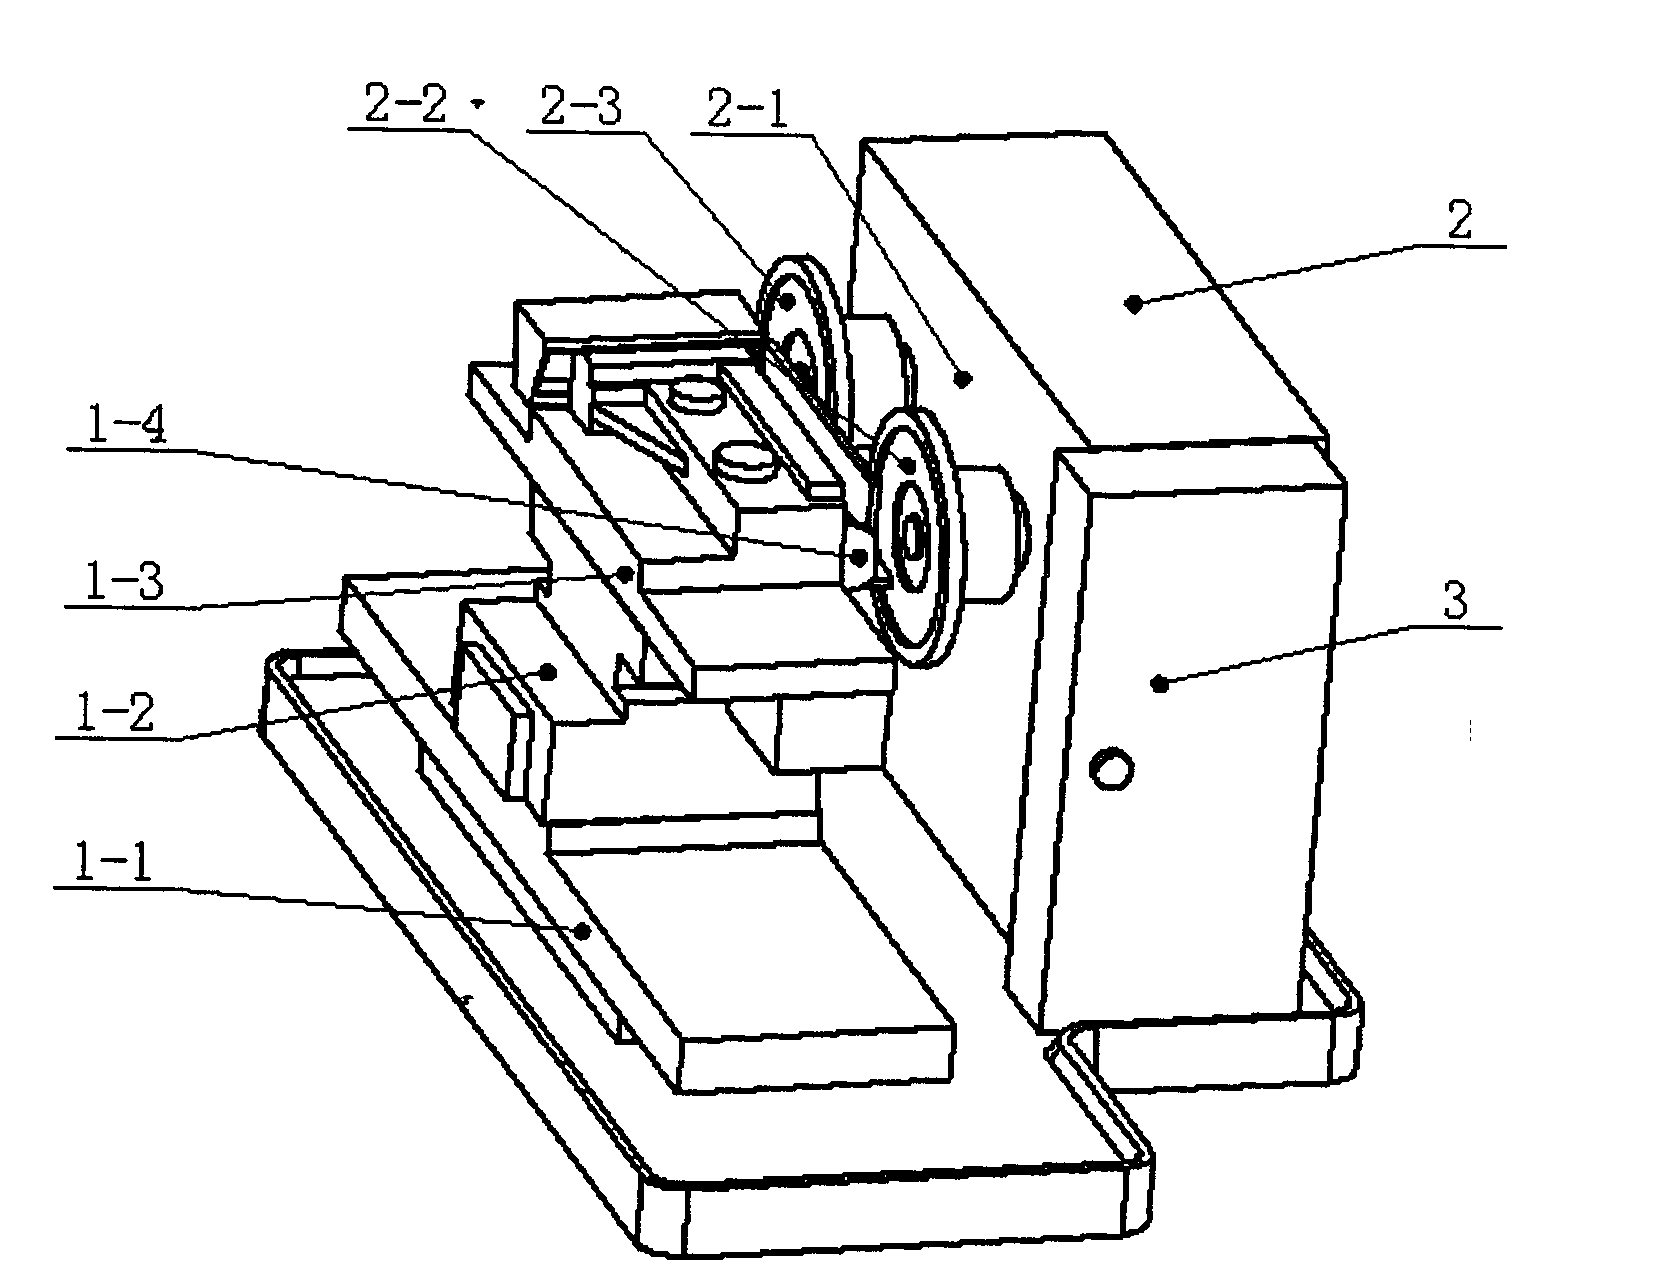 Numerical control grinder with double grinding wheels